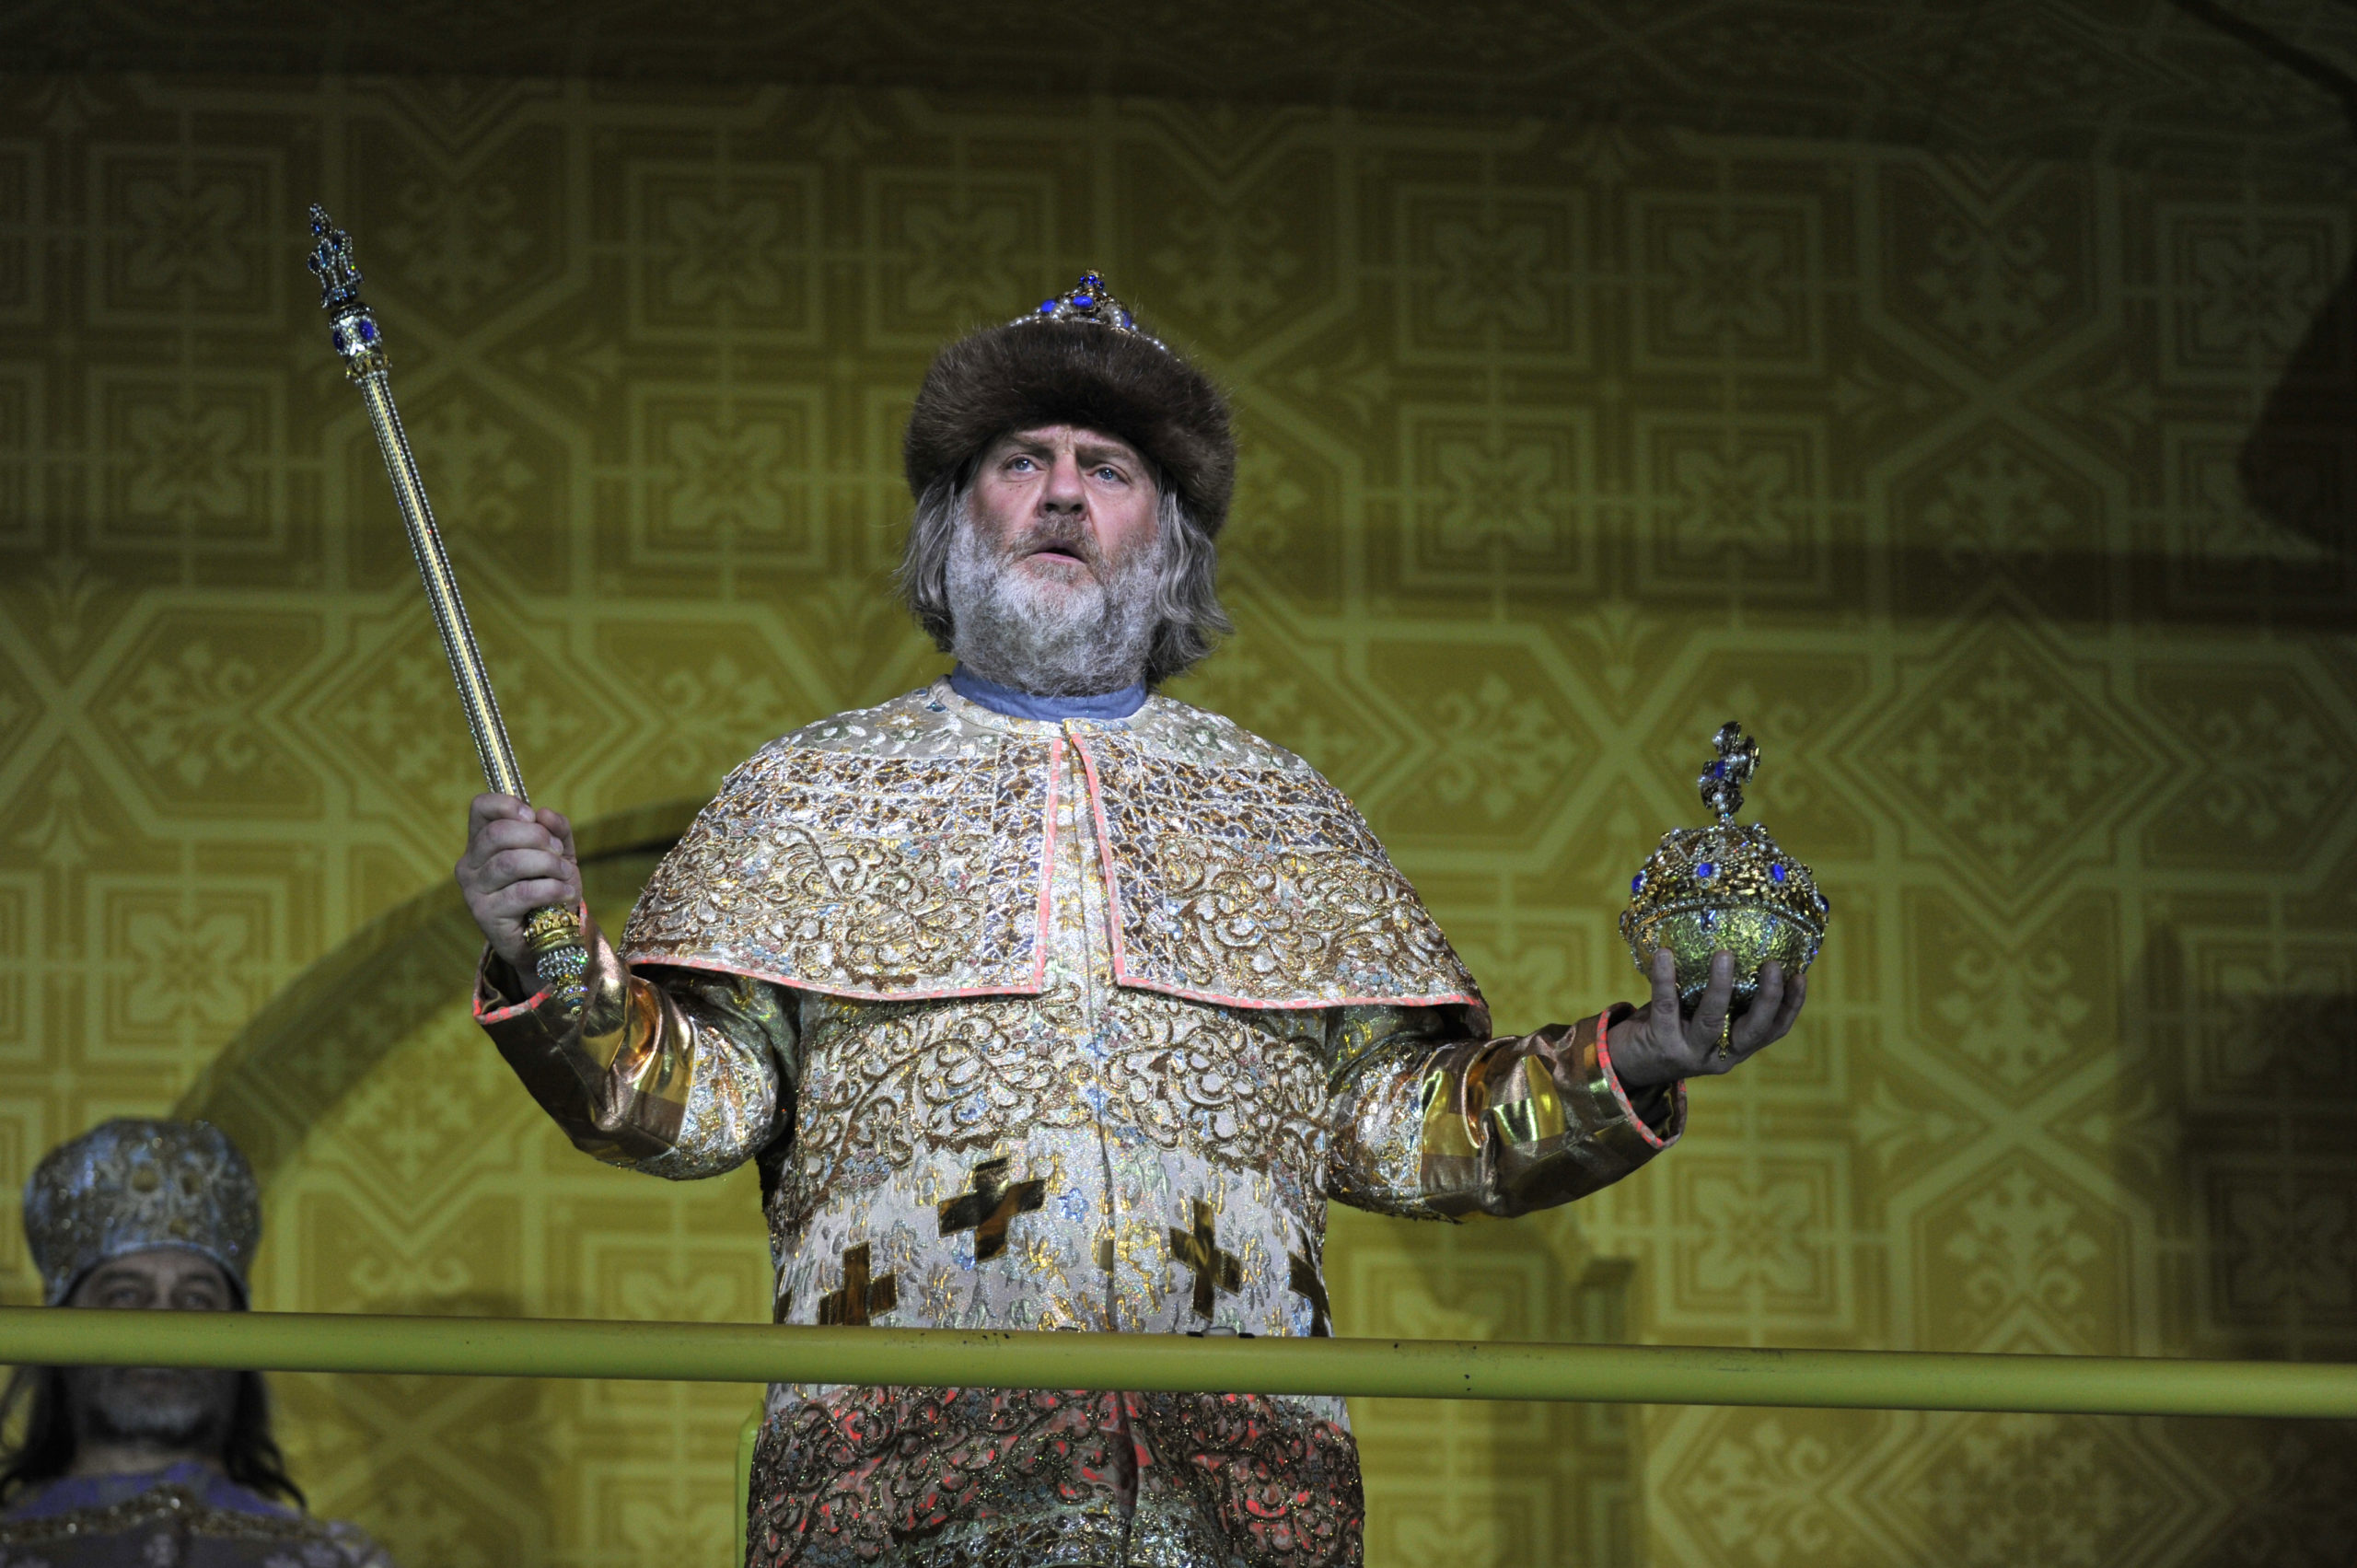 UK - The Royal Opera's production of Modest Musorgsky's Boris Godunov directed by Richard Jones and conducted by Antonio